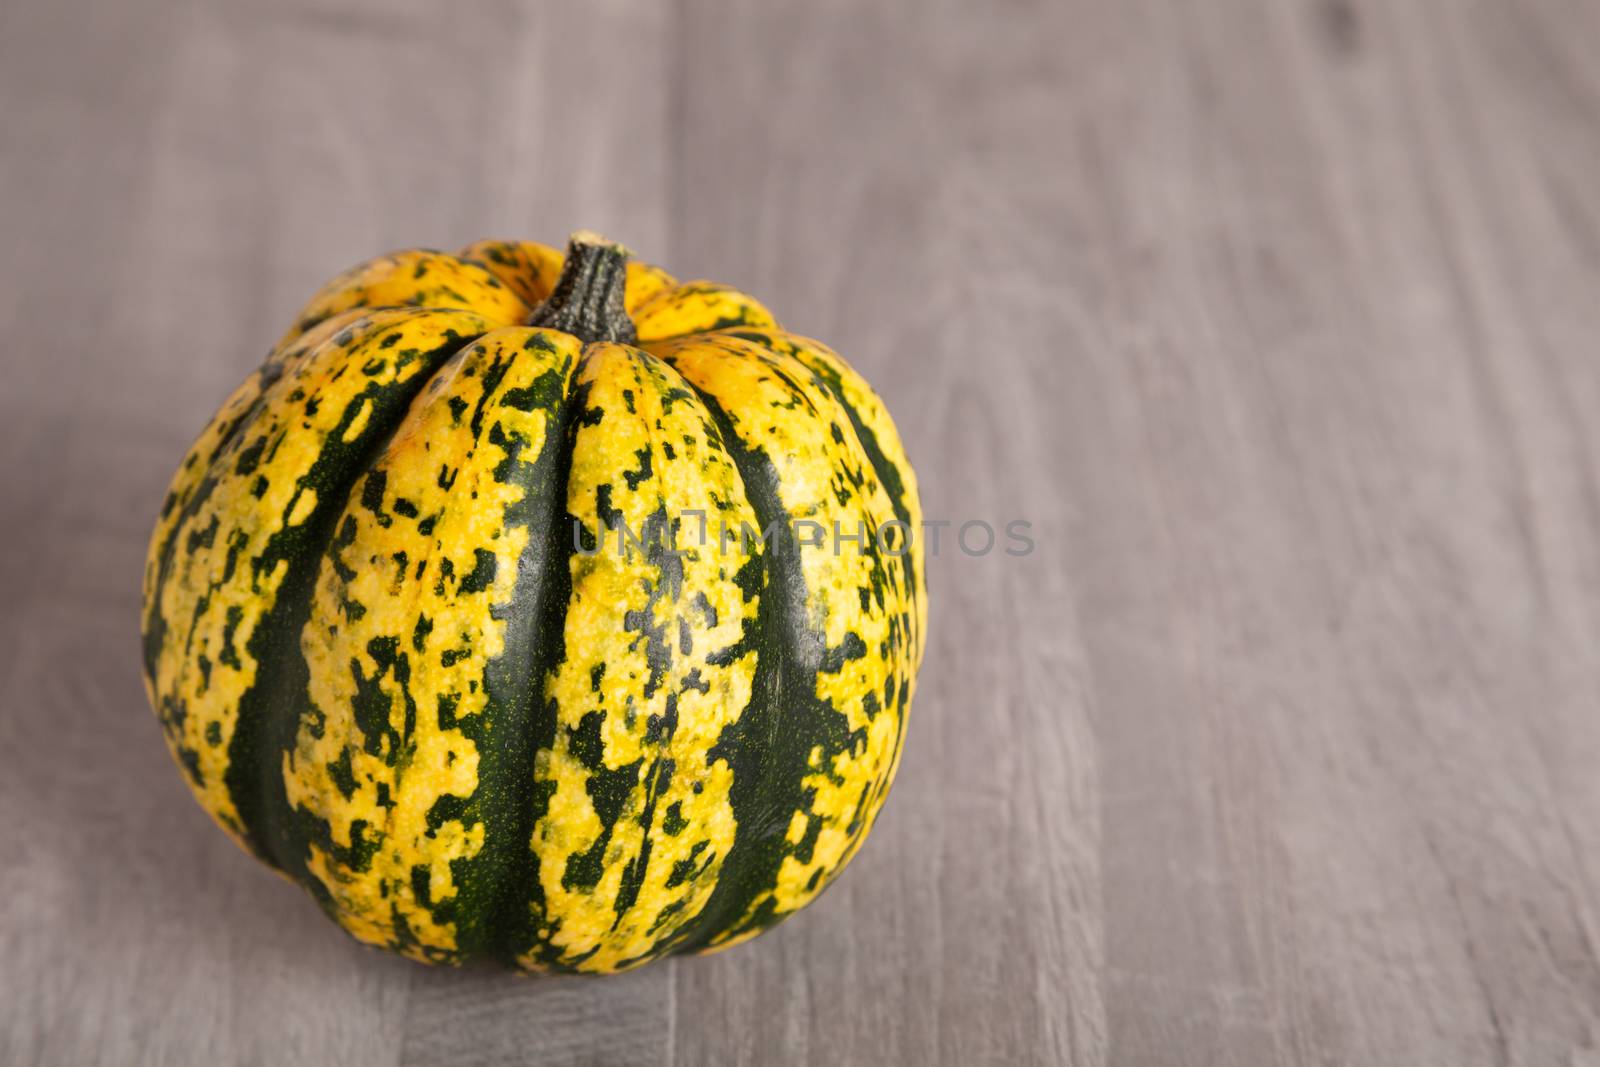 Colored beautiful pumpkin lies on a wooden background by 25ehaag6